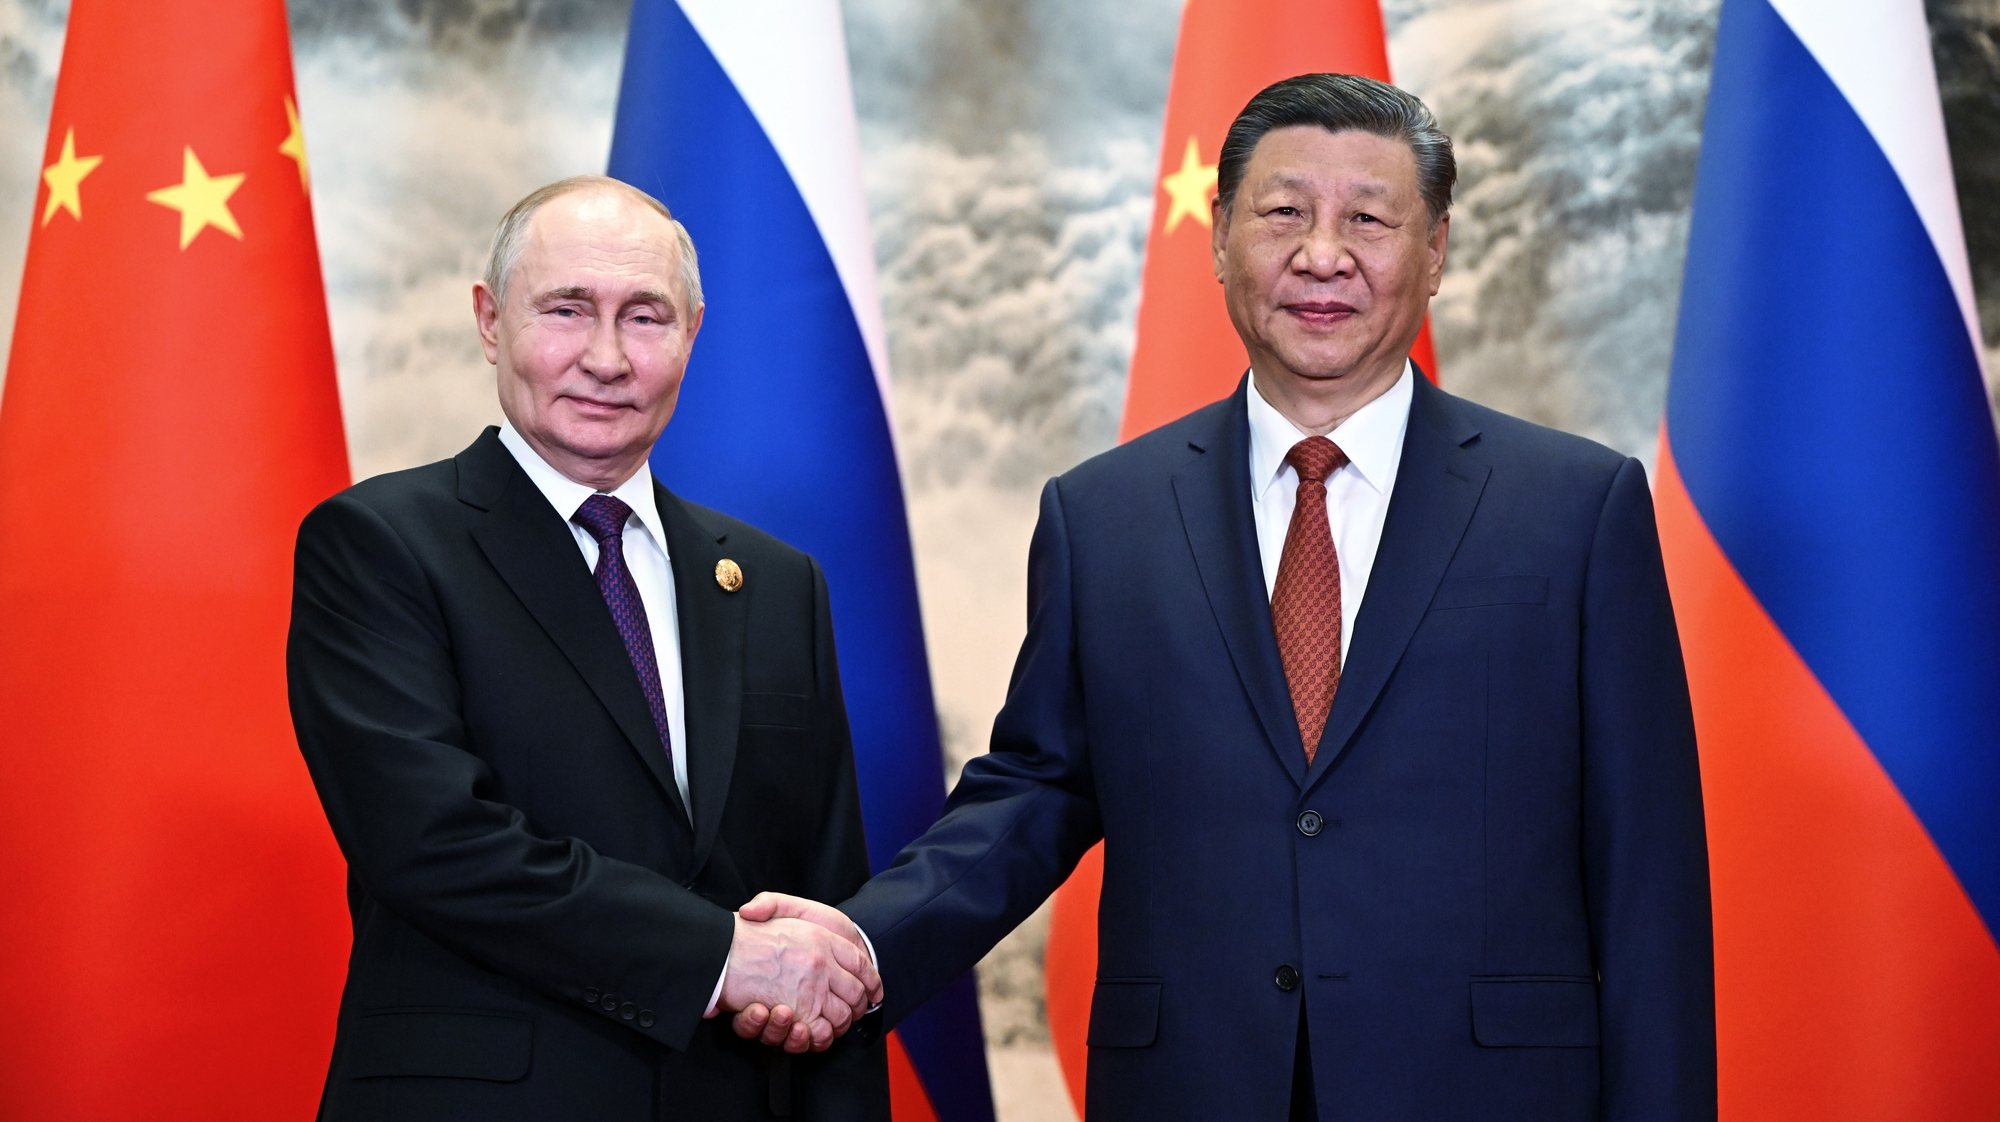 epa11343937 Russian President Vladimir Putin (L) and Chinese President Xi Jinping shake hands as they pose for photos before a meeting in narrow format at the Great Hall of the People in Beijing, China, 16 May 2024. The Russian president is on an official visit to China on 16 and 17 May.  EPA/SERGEY GUNEEV / SPUTNIK / KREMLIN POOL MANDATORY CREDIT